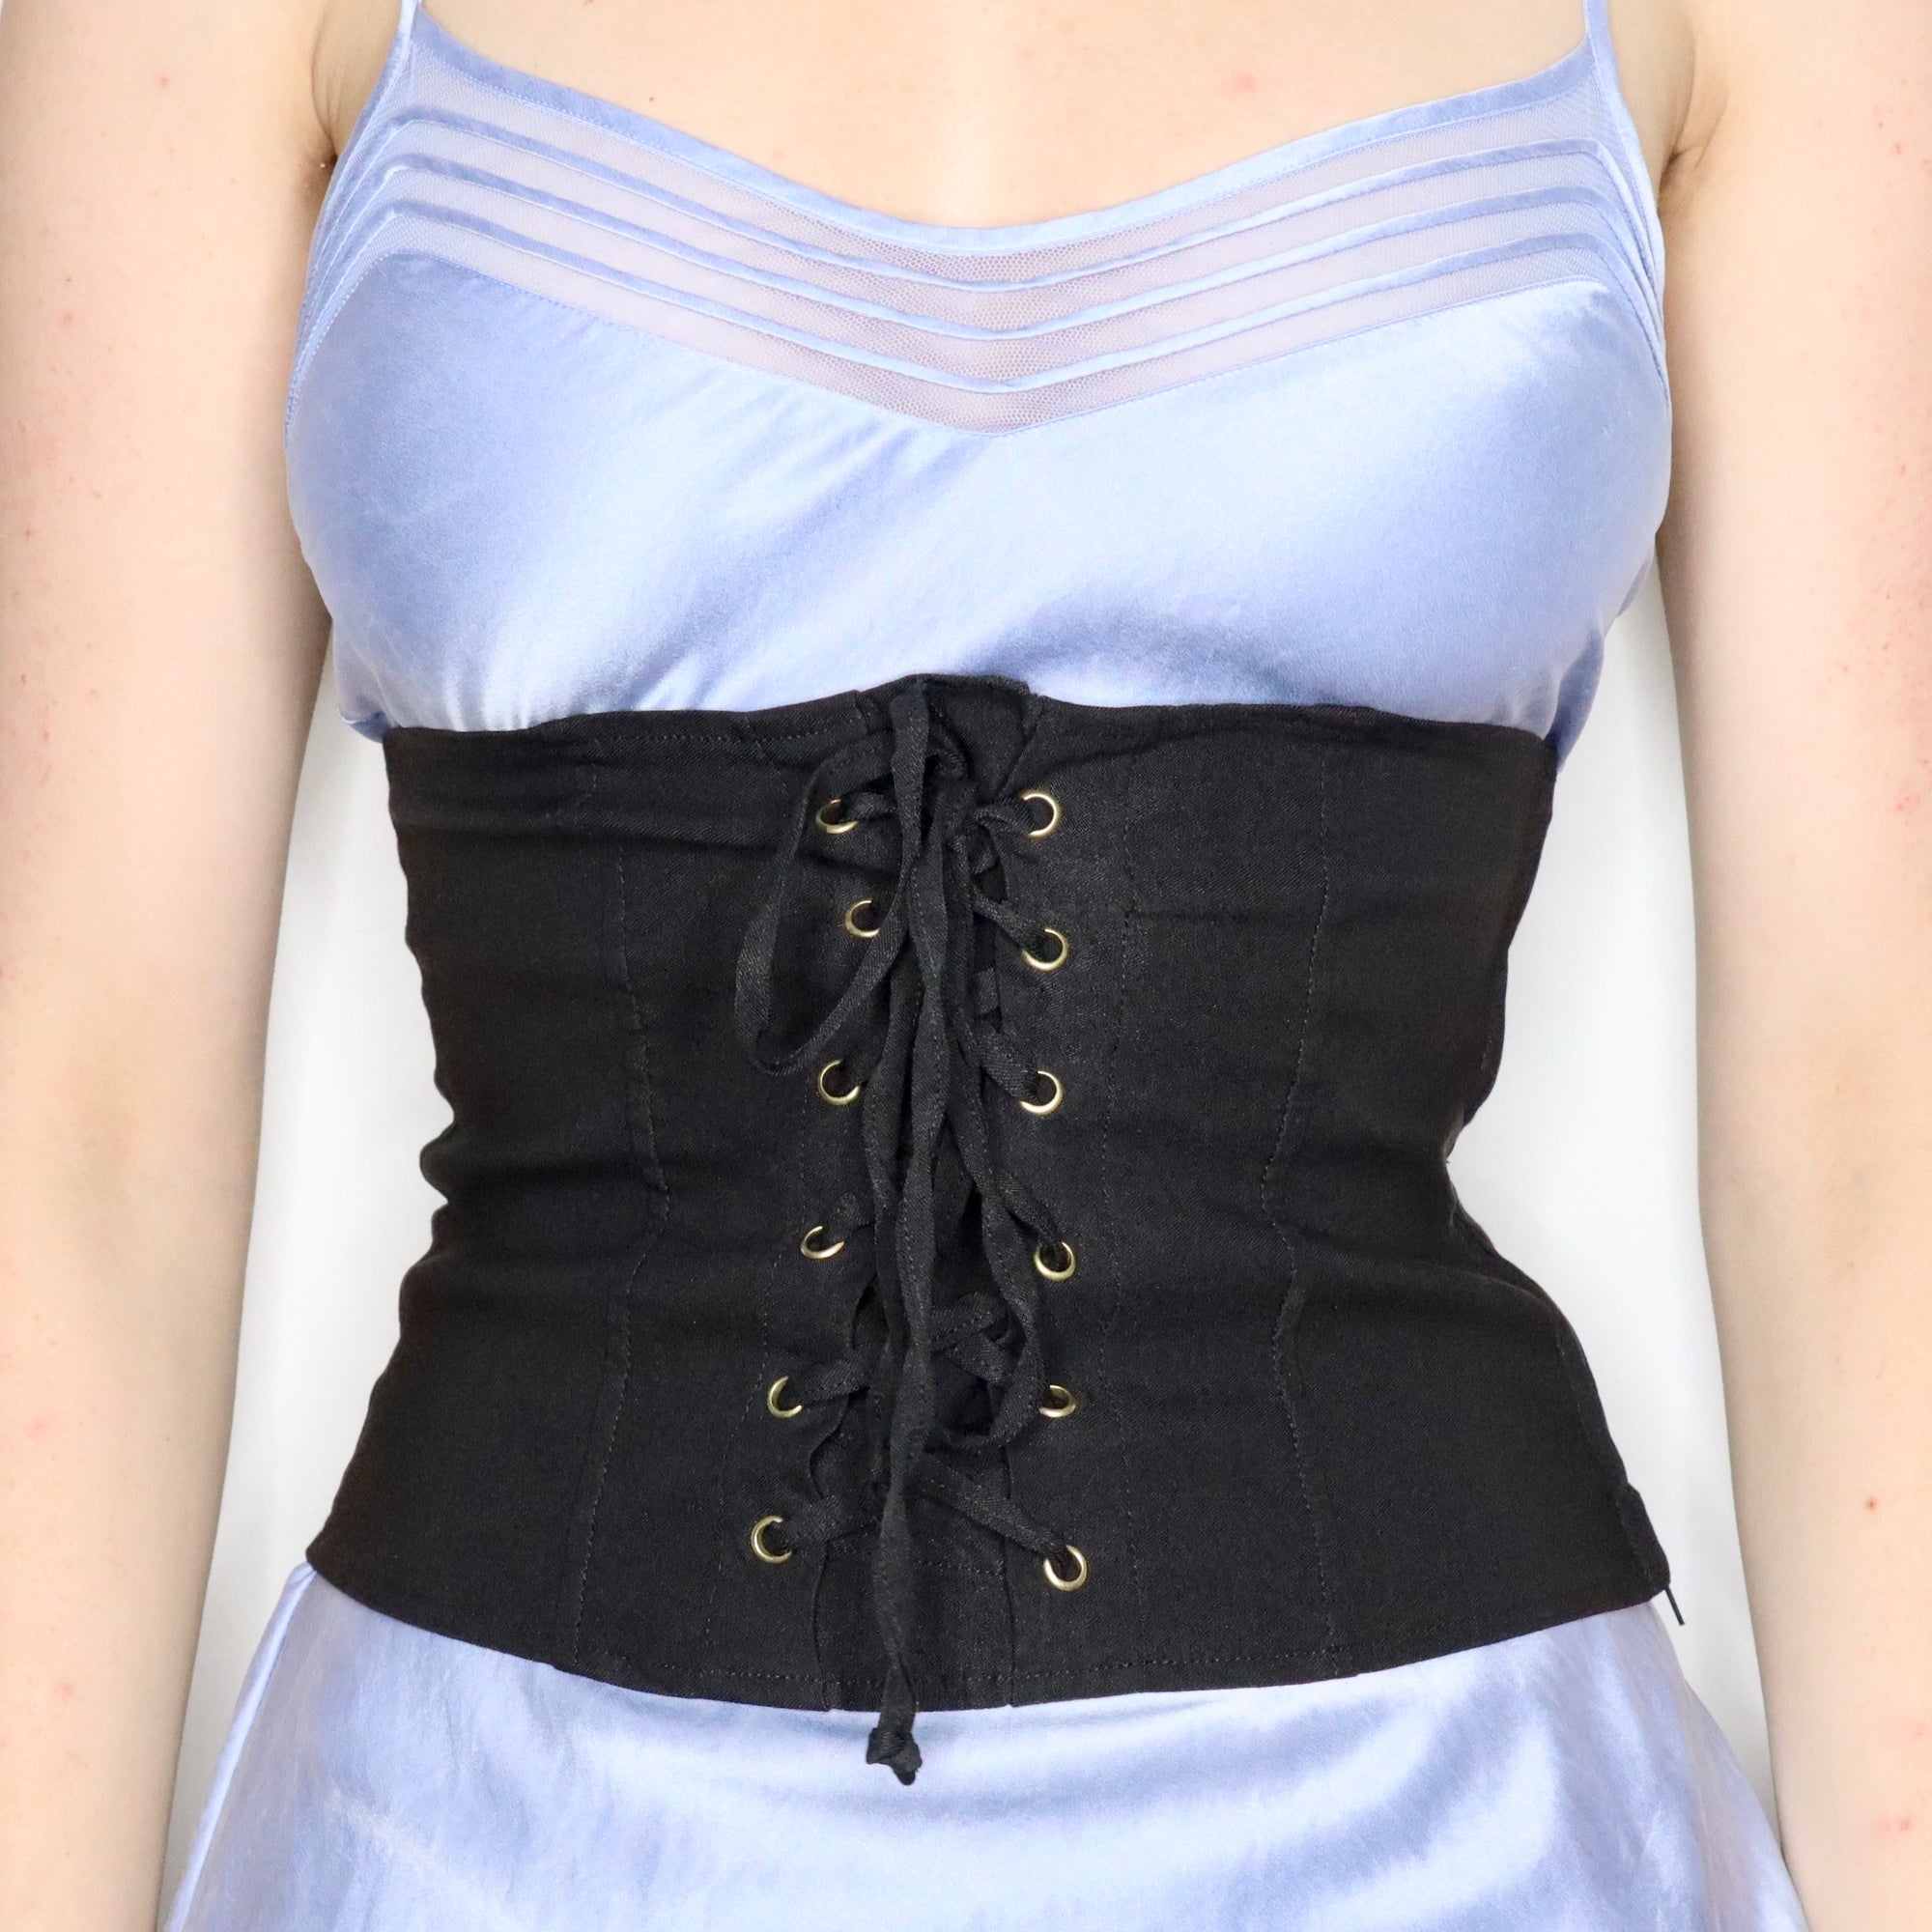 Early 2000s Stretchy Black Lace-up Corset